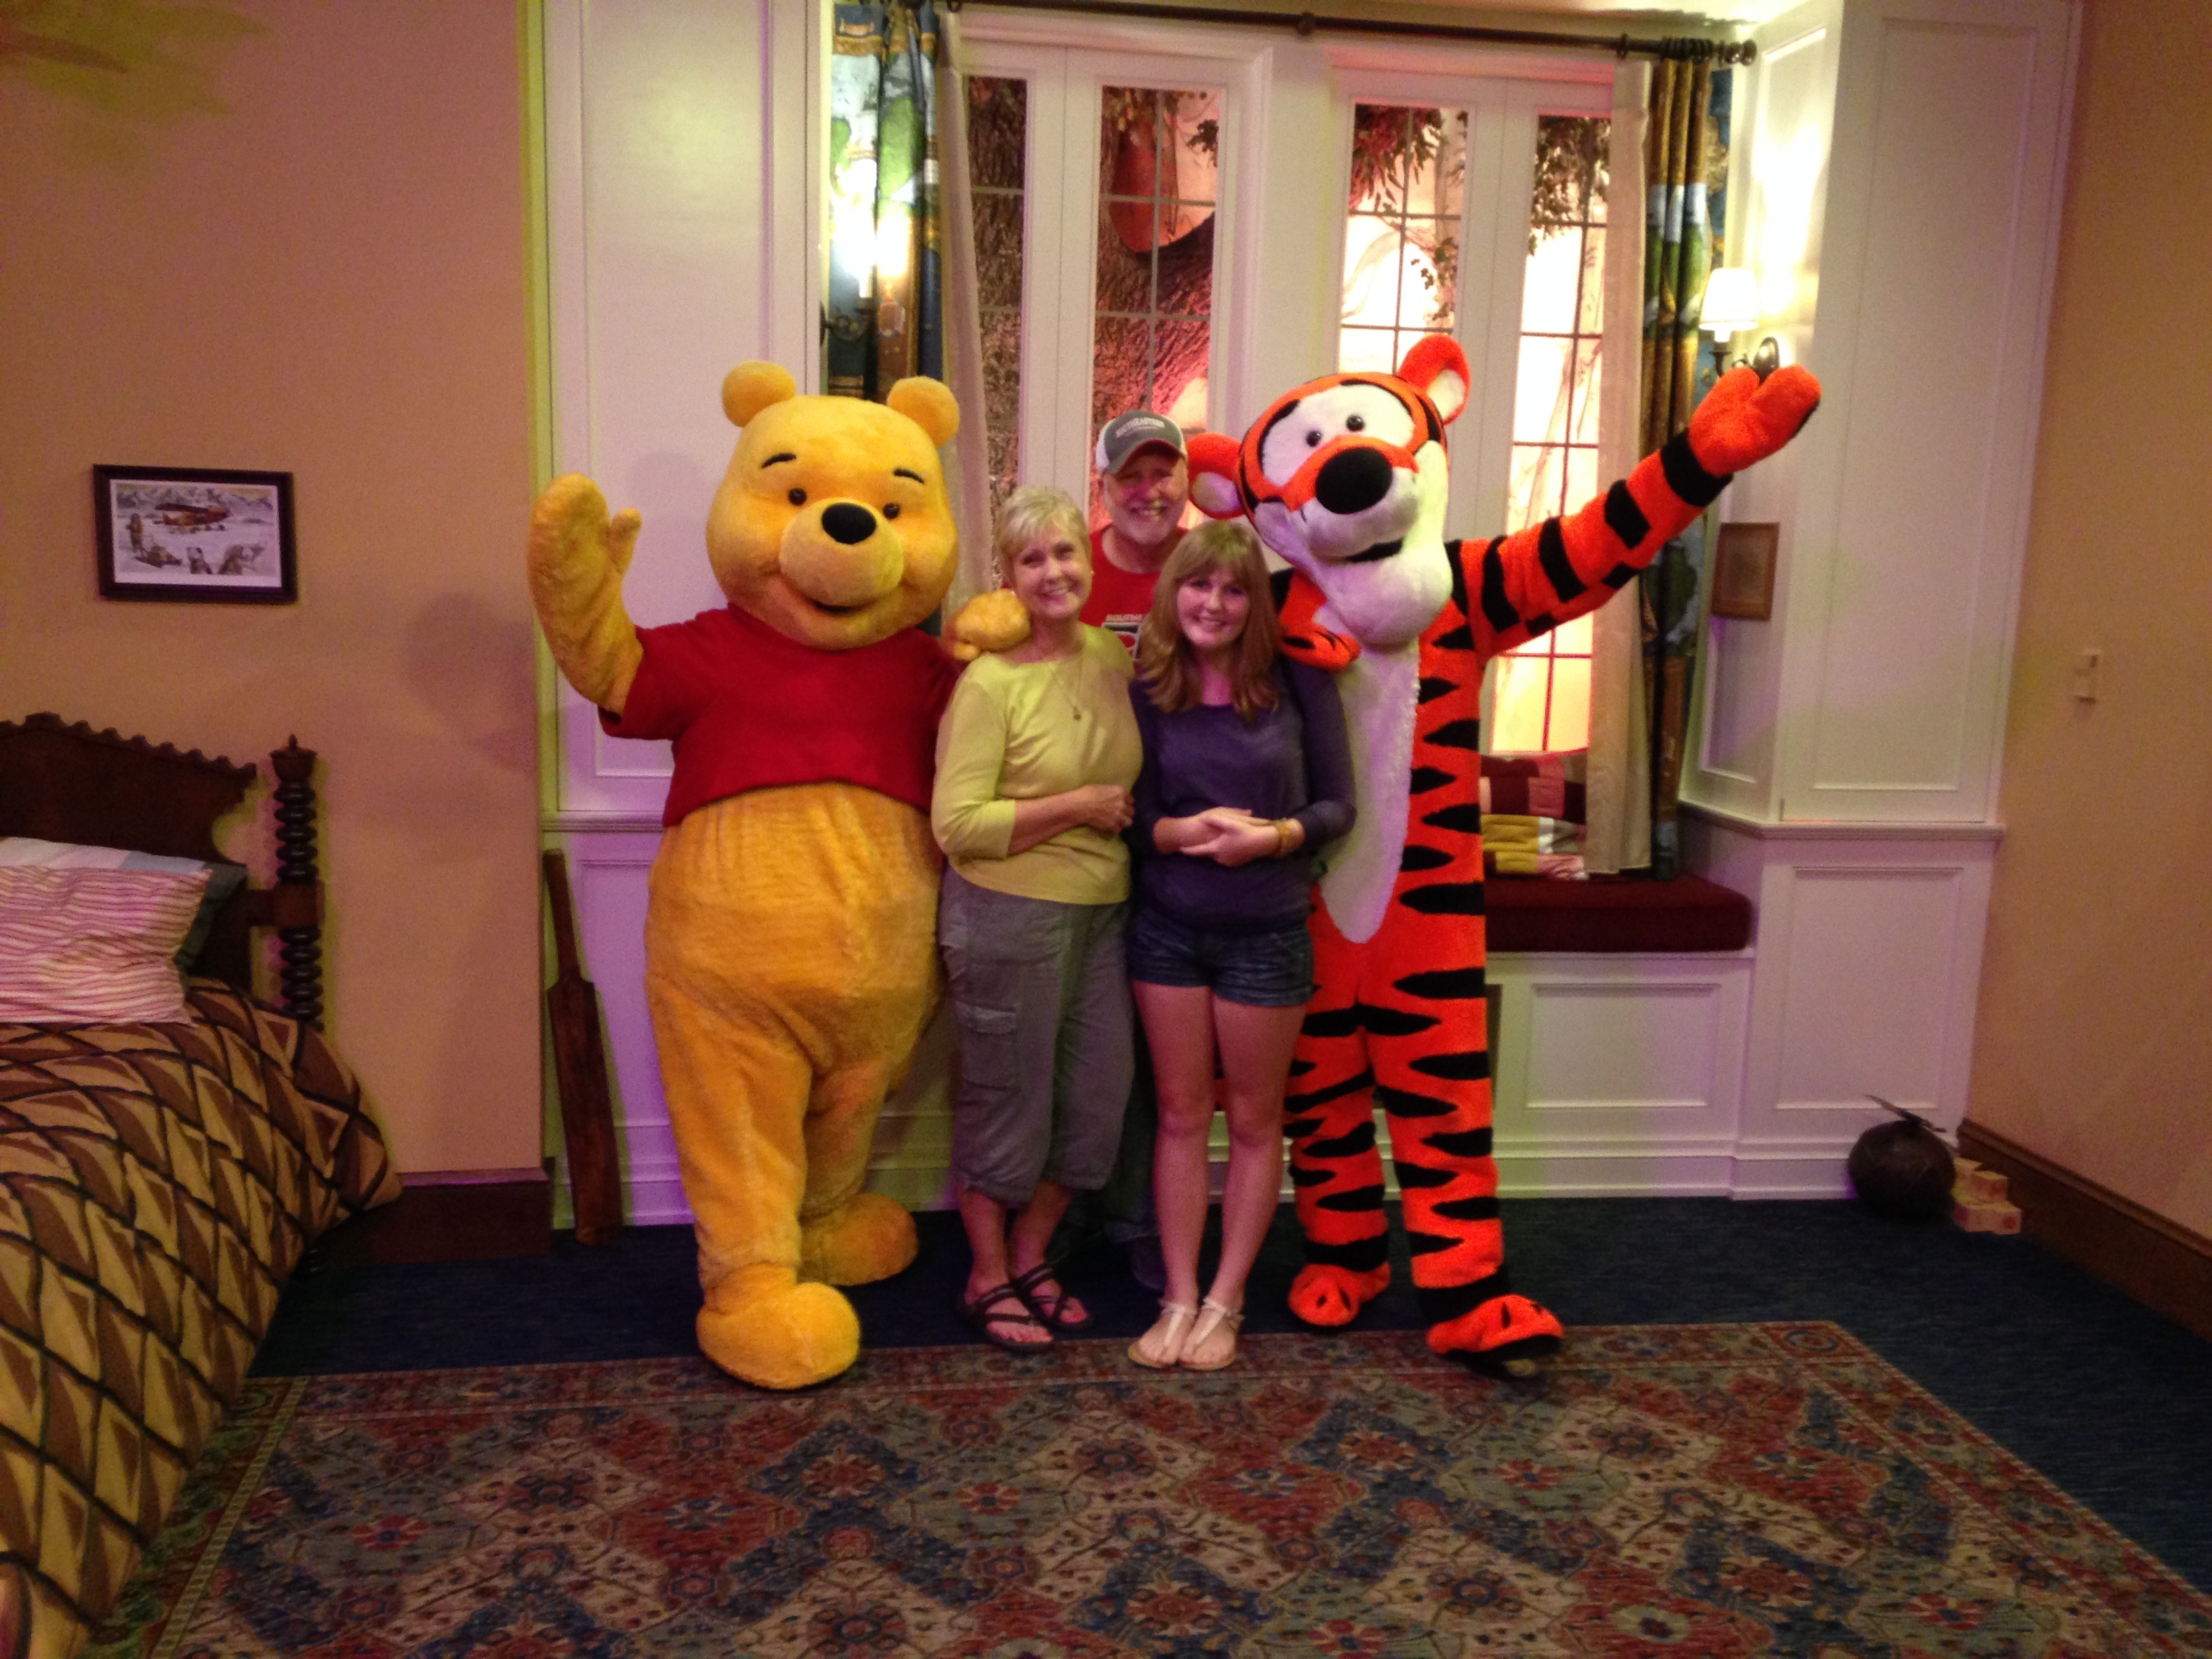 The author with her family and Disney characters